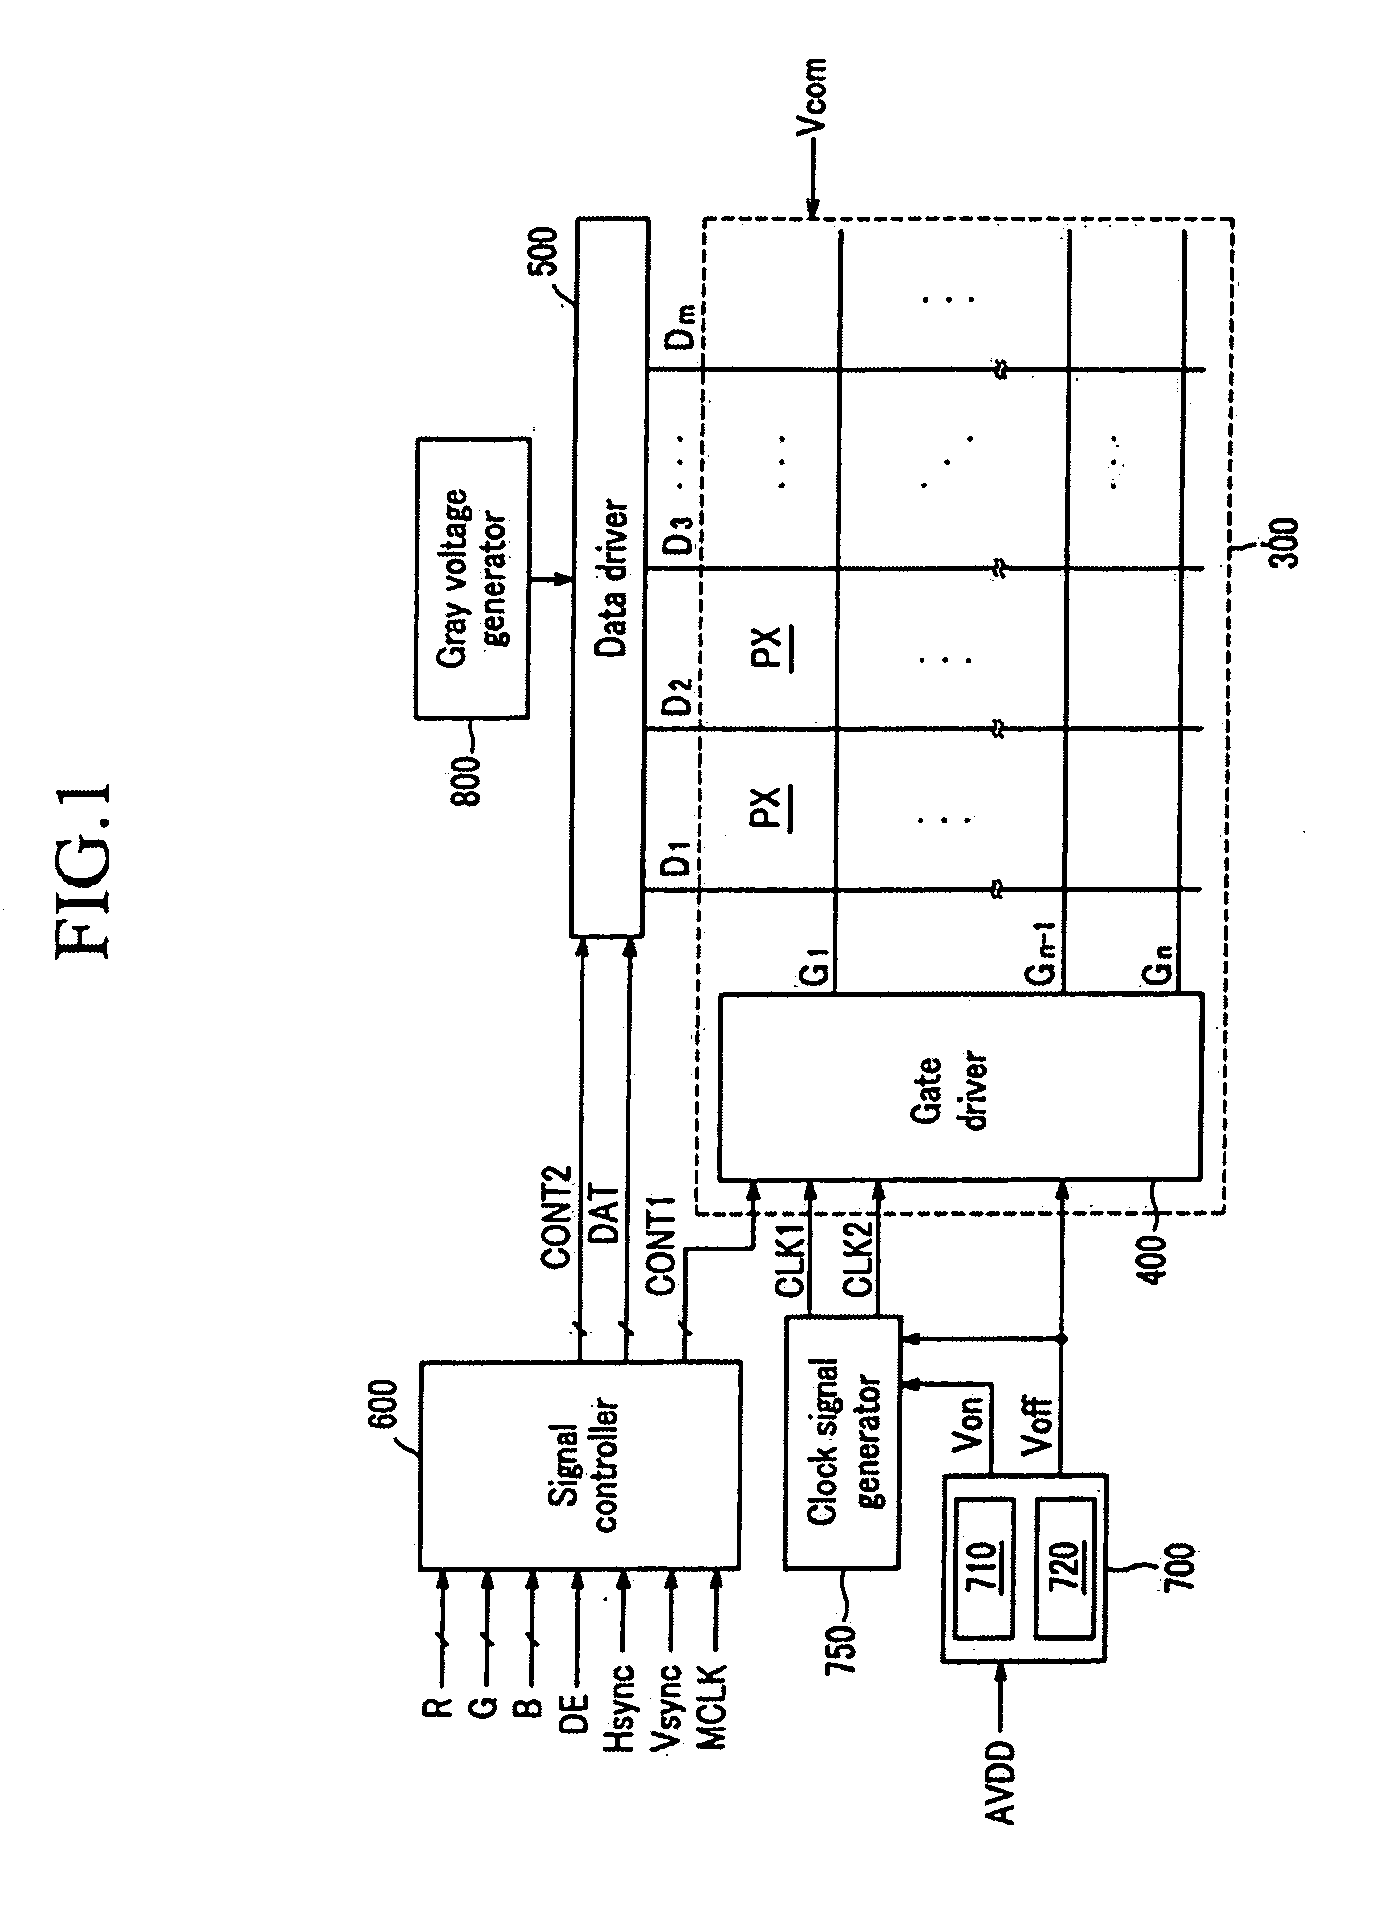 Driving apparatus for a liquid crystal display and liquid crystal display including the same